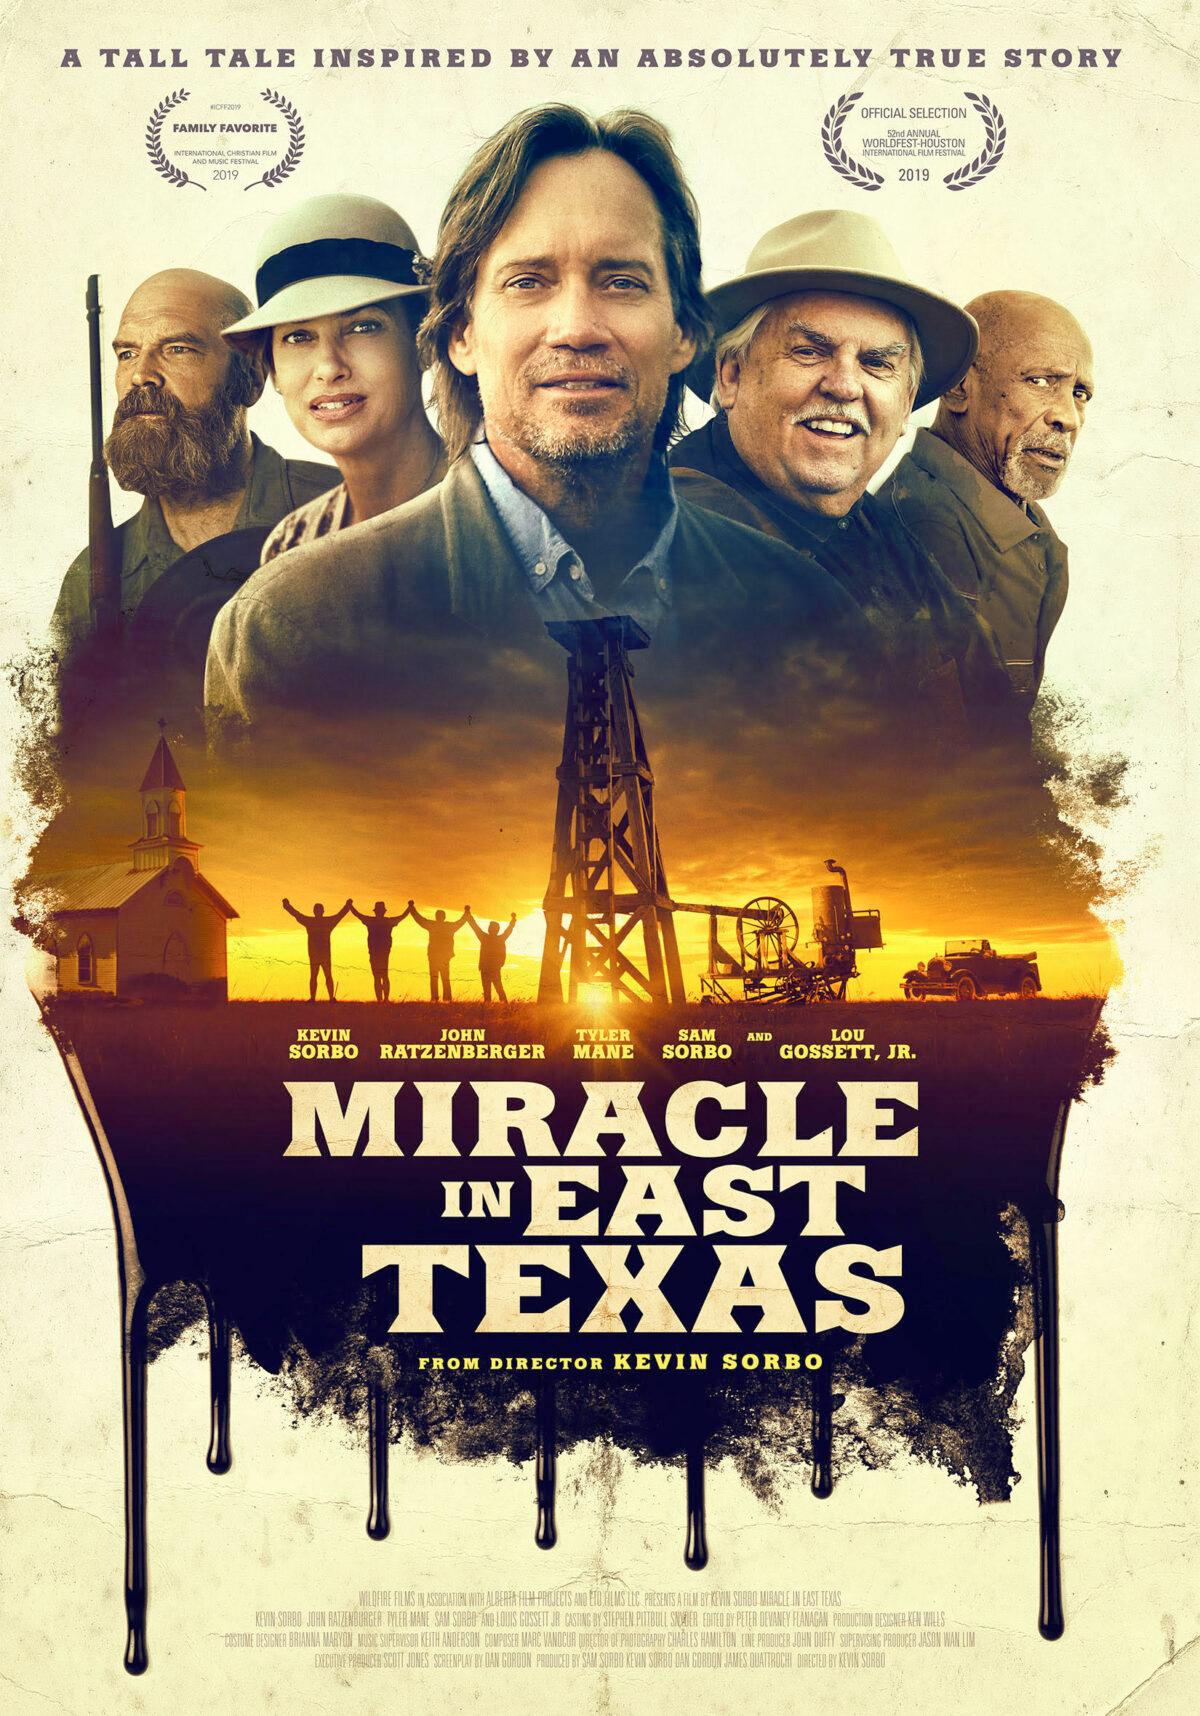 "Miracle in East Texas," which stars Sam Sorbo and Kevin Sorbo, is currently on the film festival circuit, and due in theaters in spring 2020. (Courtesy of Sam Sorbo)